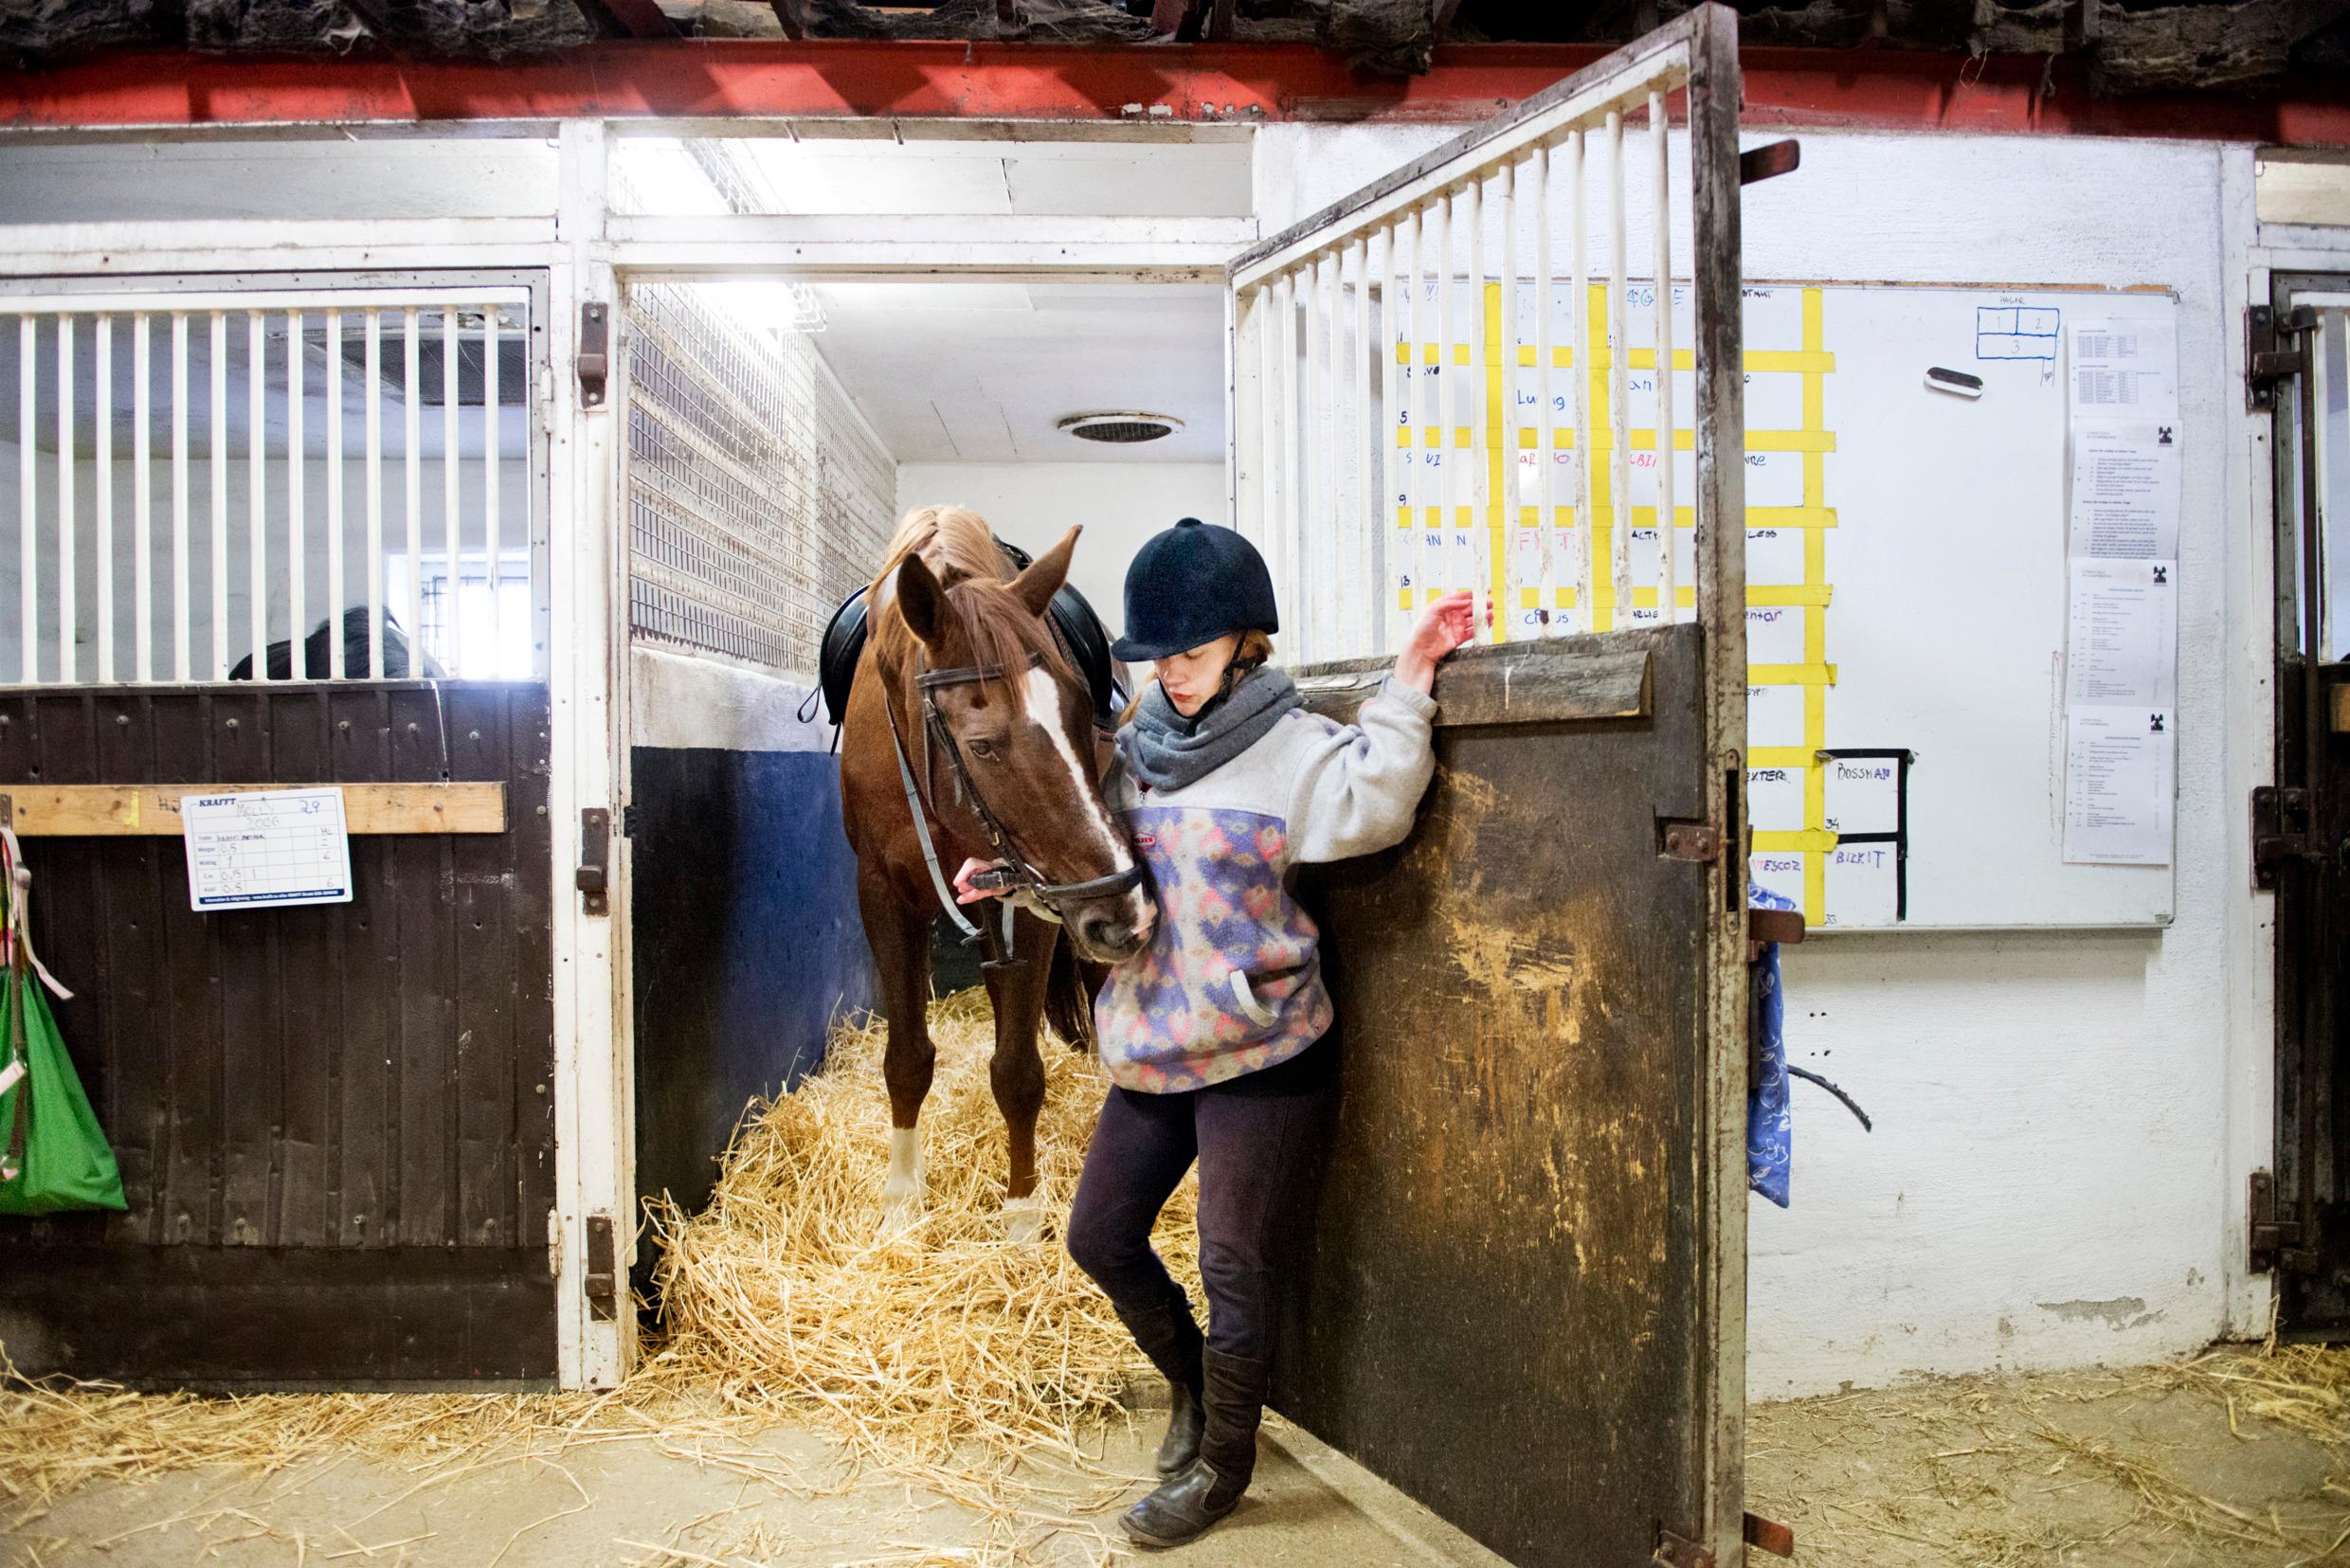 A girl and a horse in a stable.